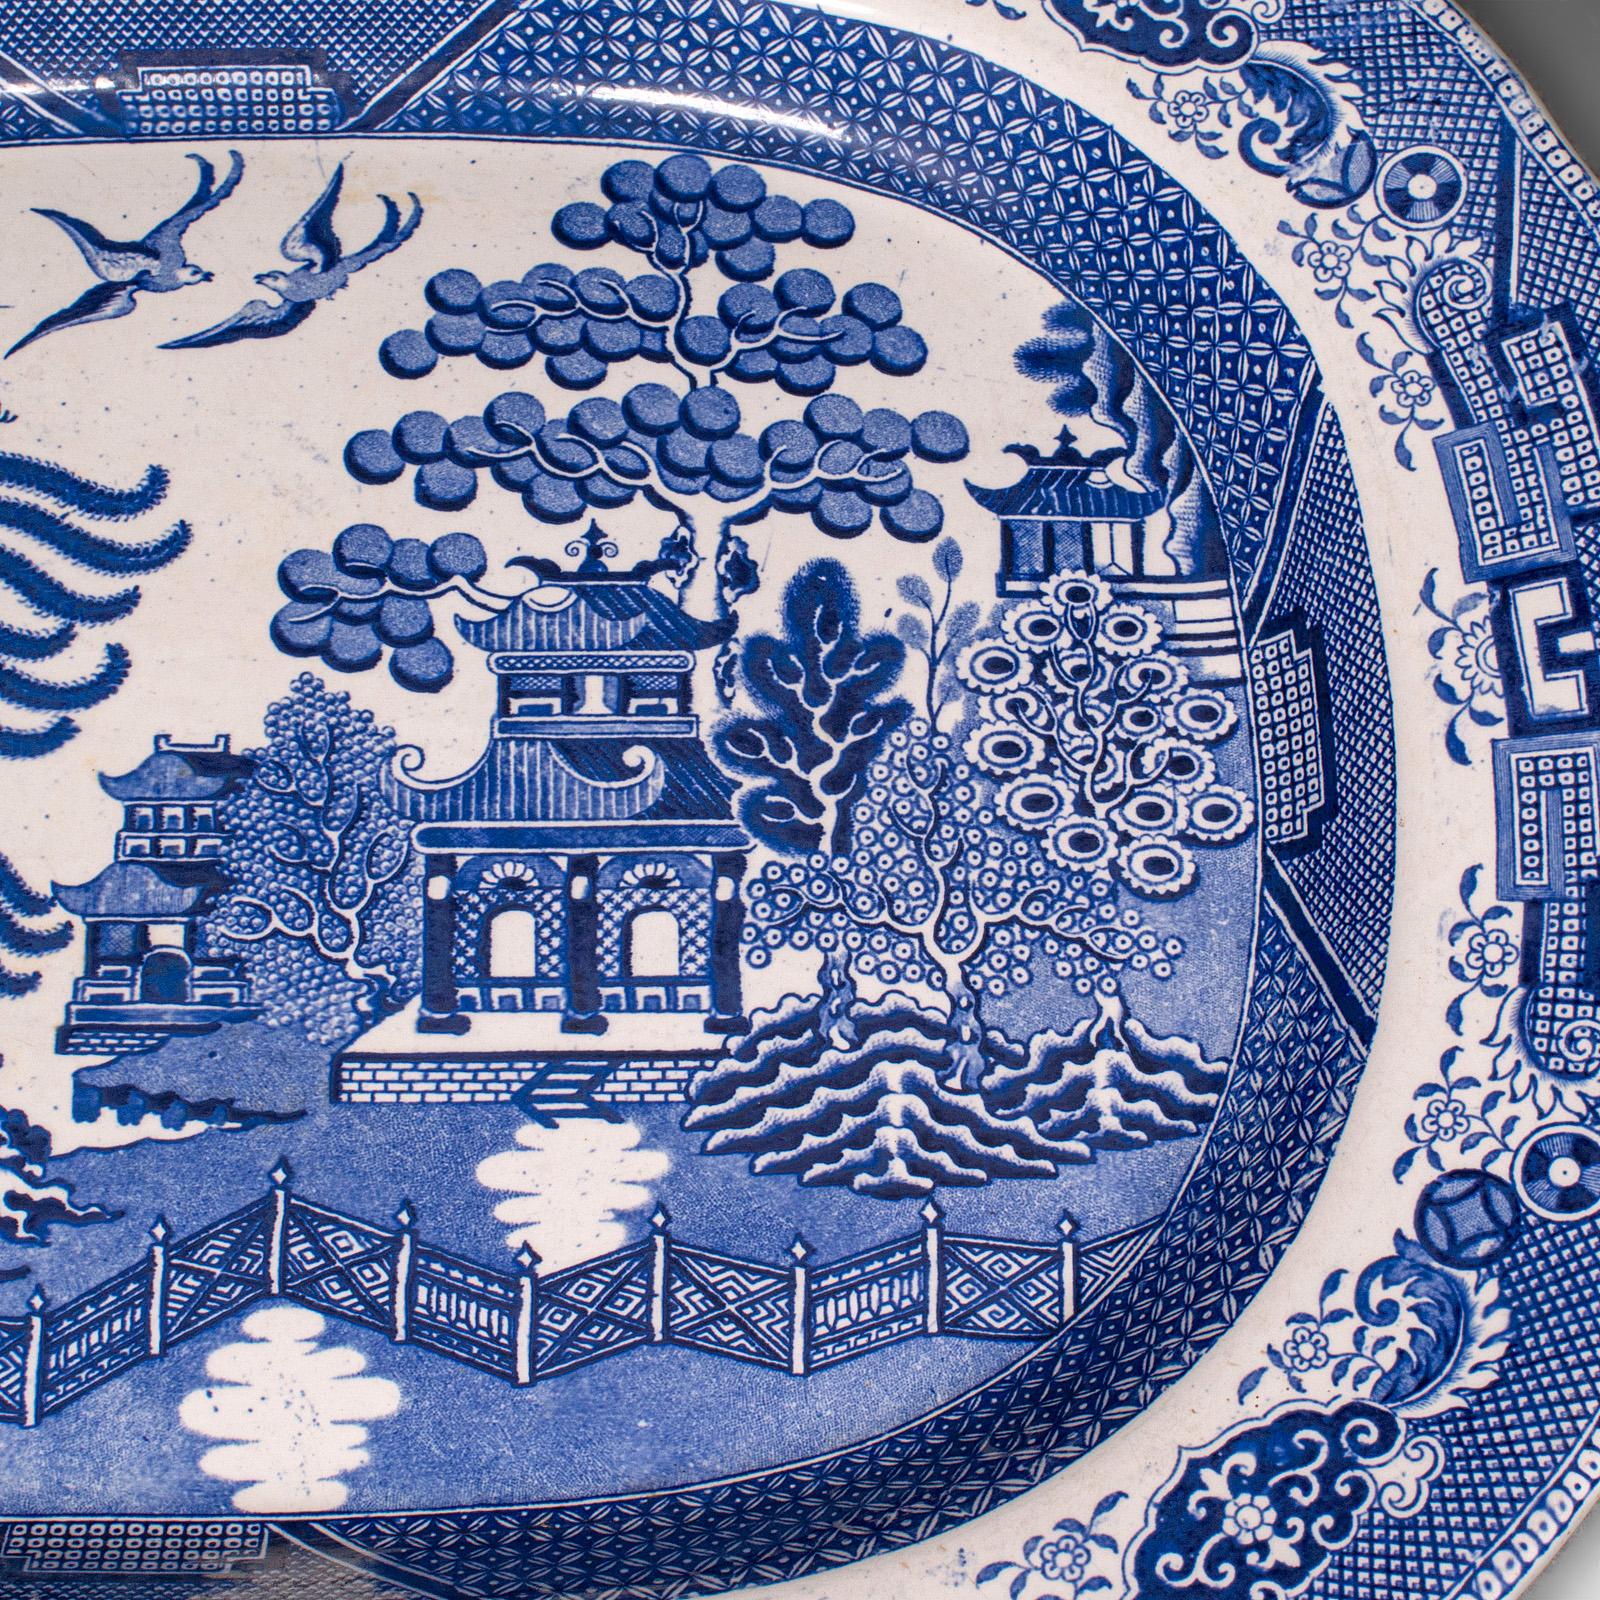 Antique Willow Pattern Serving Plate, English, Ceramic, Meat Dish, Victorian For Sale 3